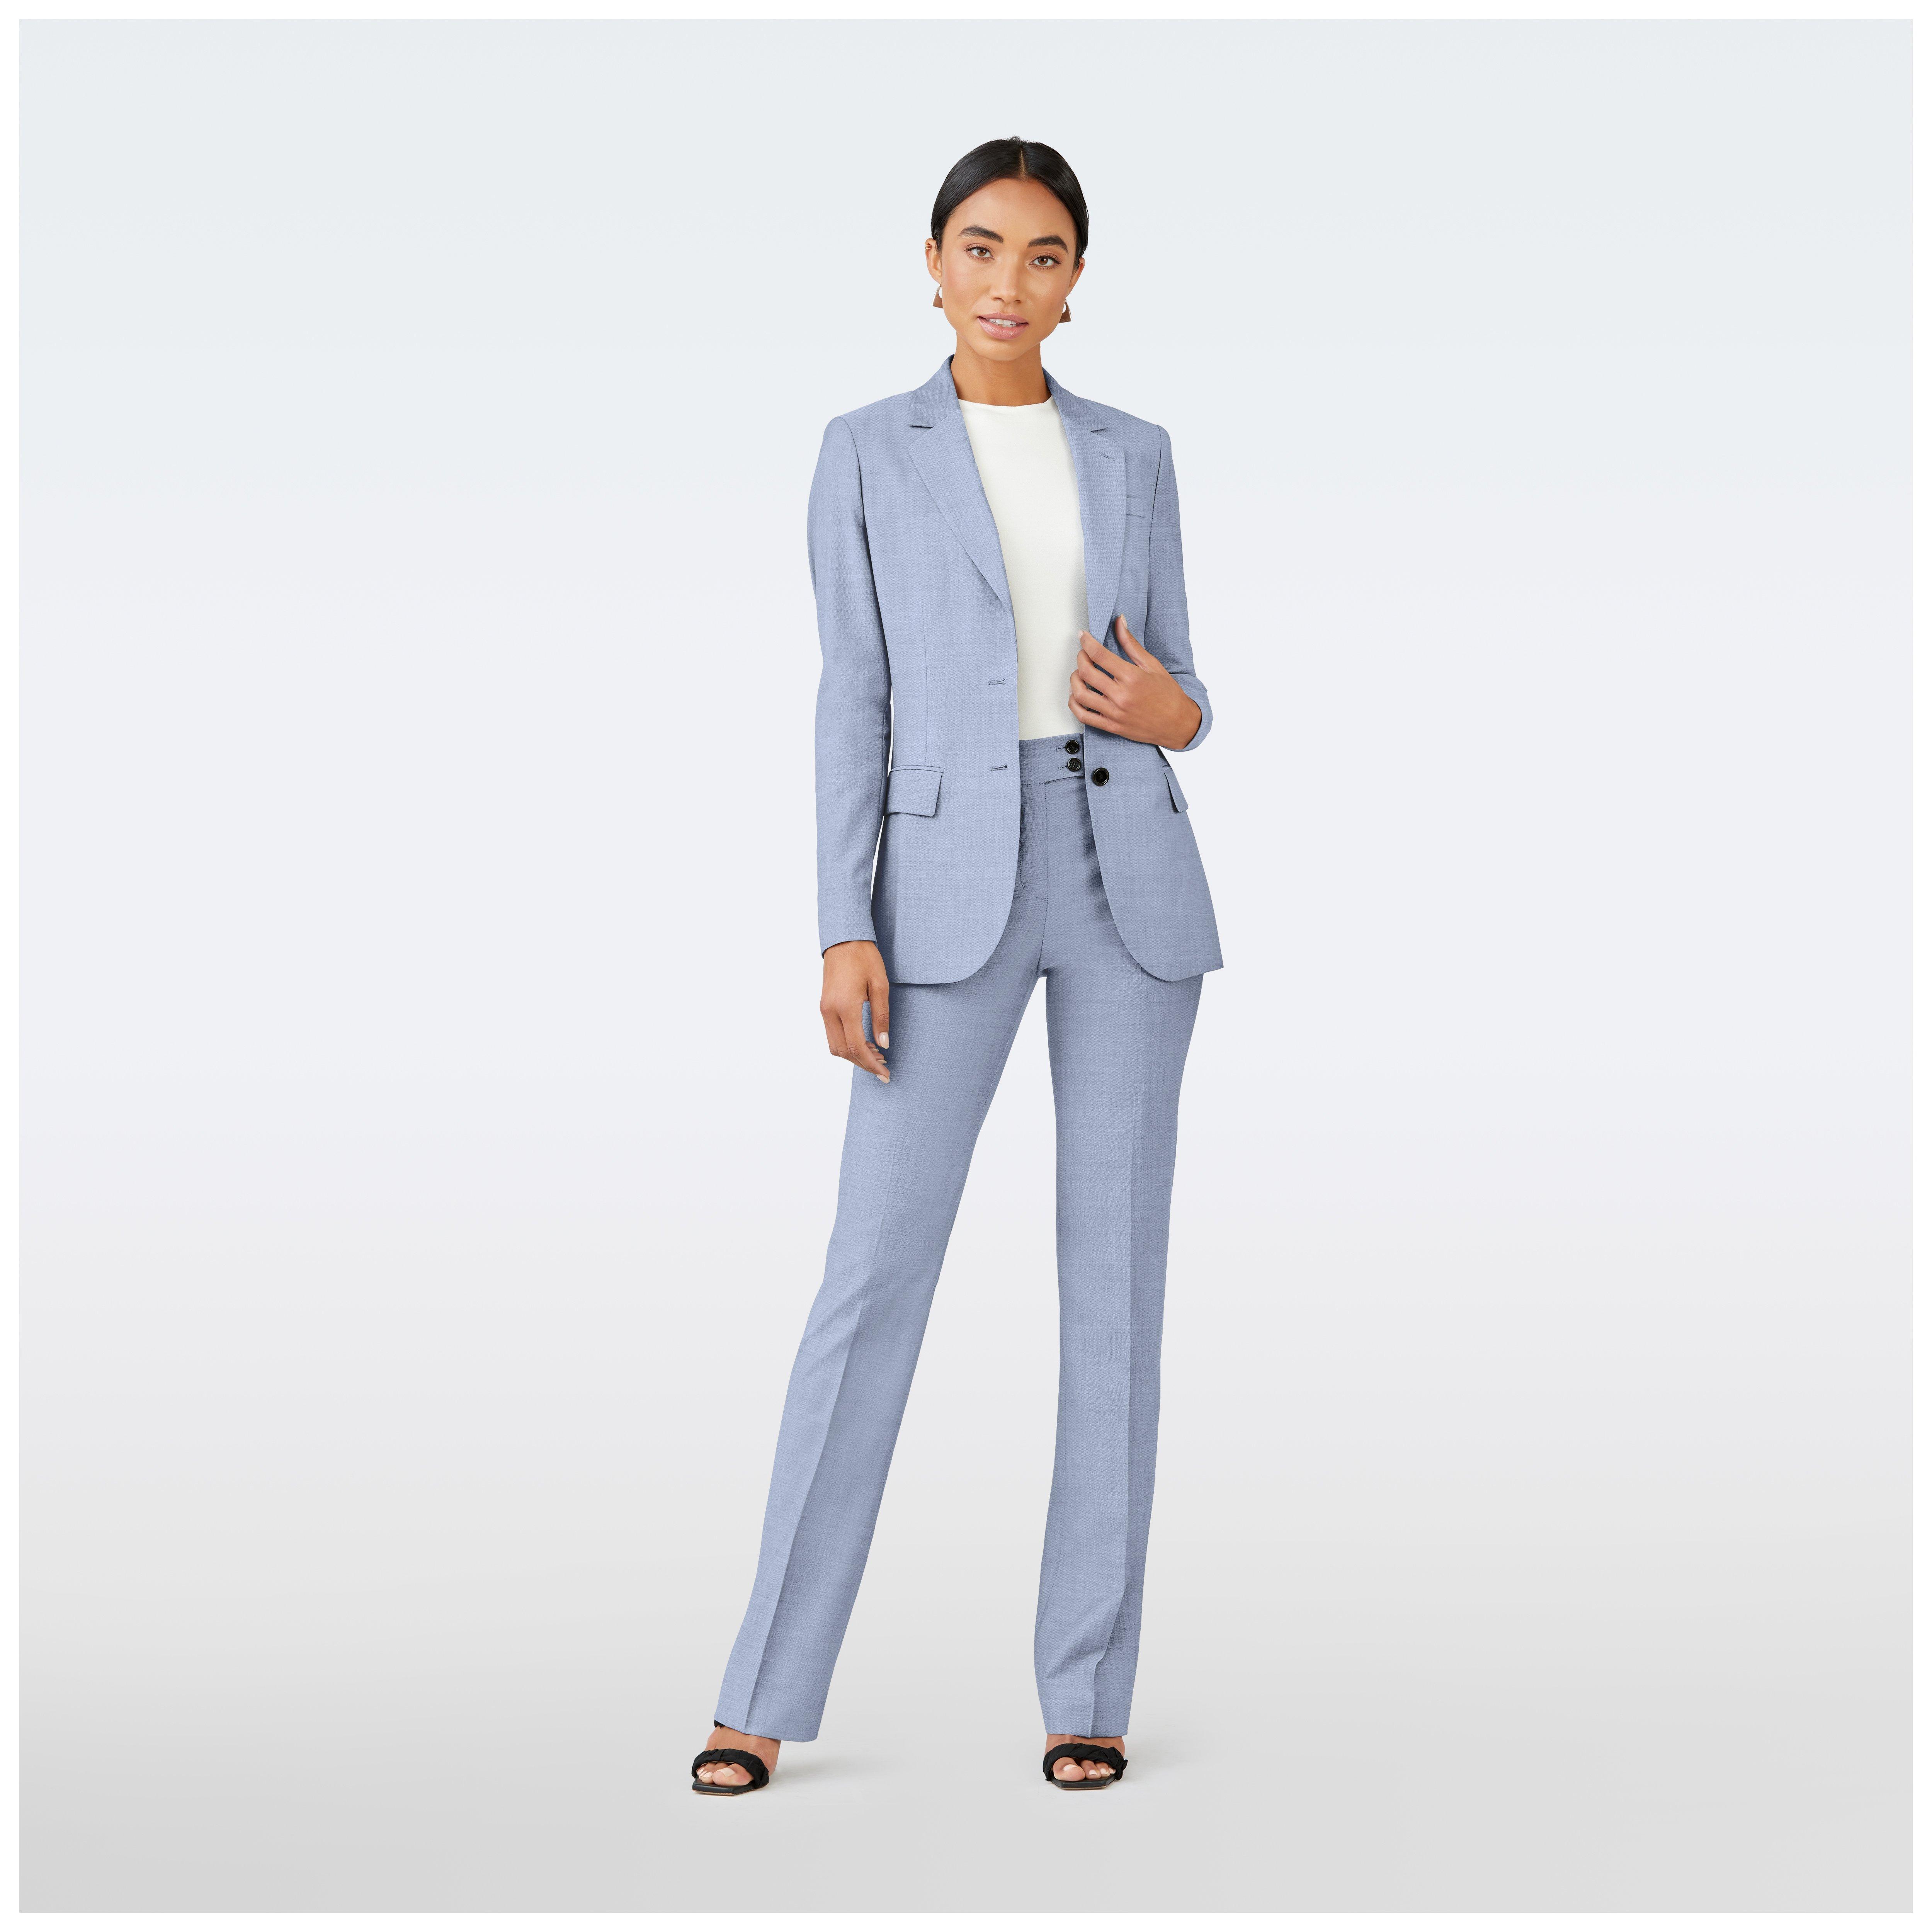 Women's Blue Suits, Made to Measure